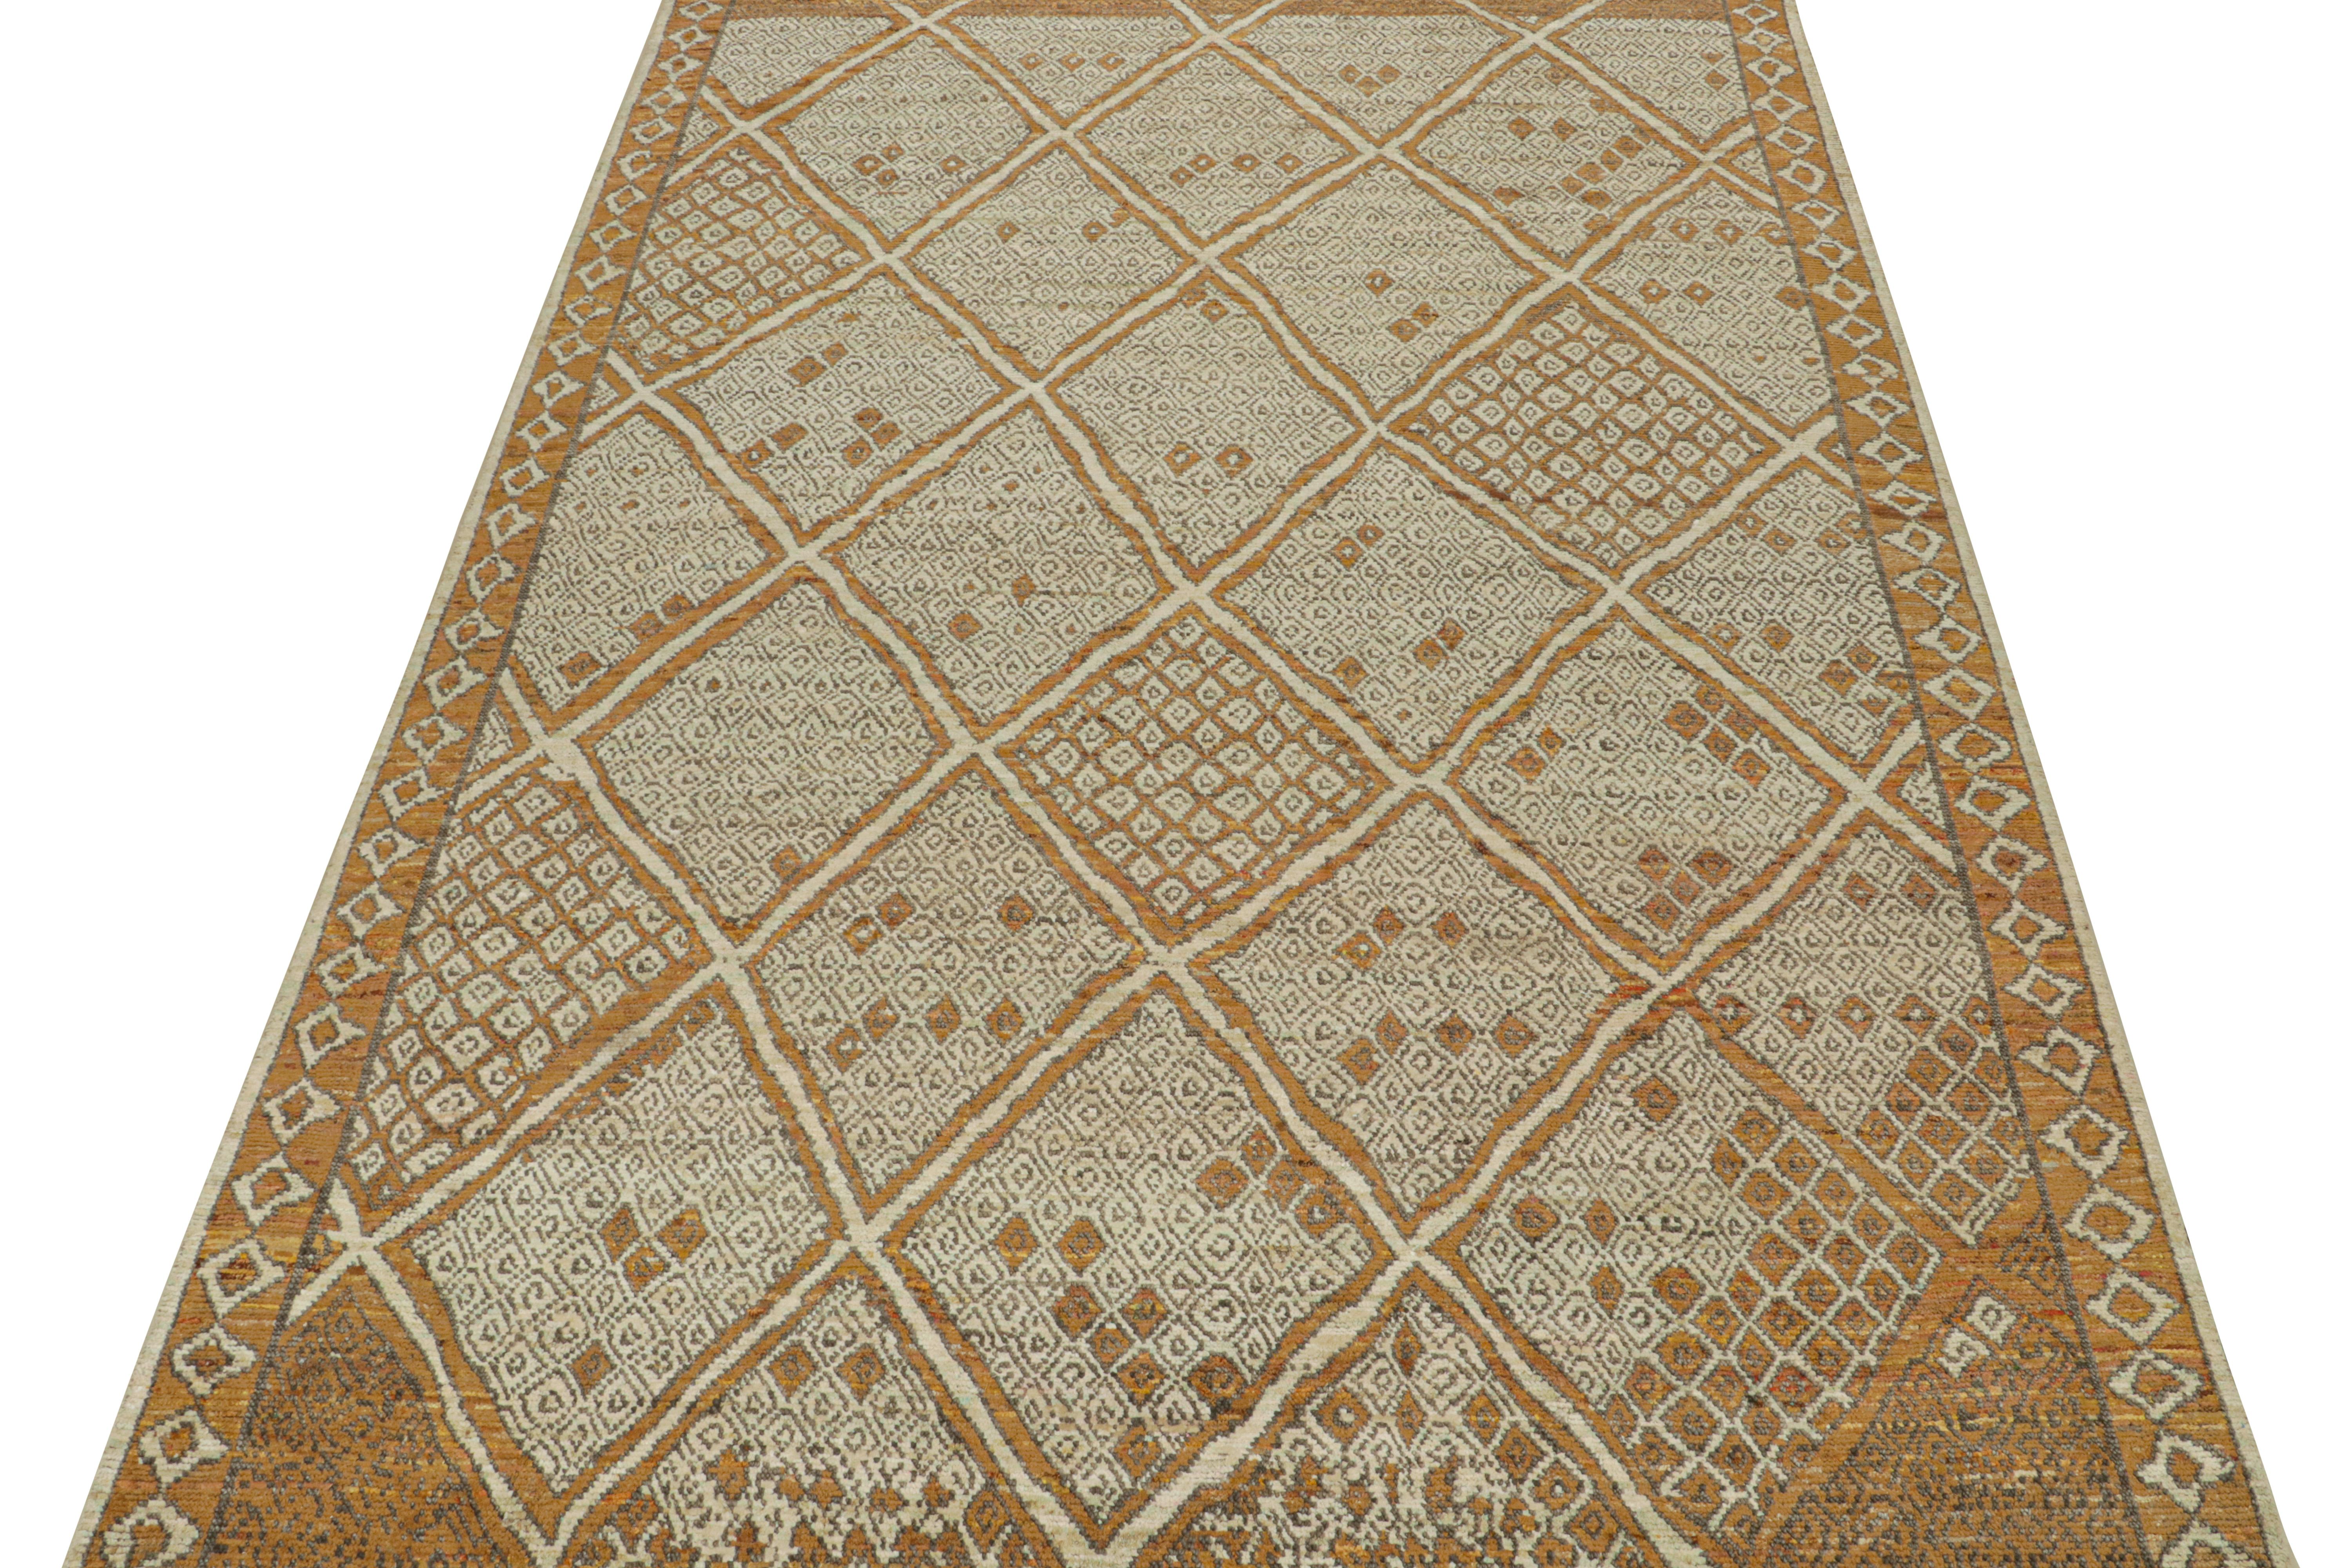 This 10x14 rug is a new addition to Rug & Kilim’s Moroccan rug collection. Hand-knotted in wool and silk, its design recaptures the classic tribal sensibility in a new modern quality.

This particular design enjoys geometric patterns, and an